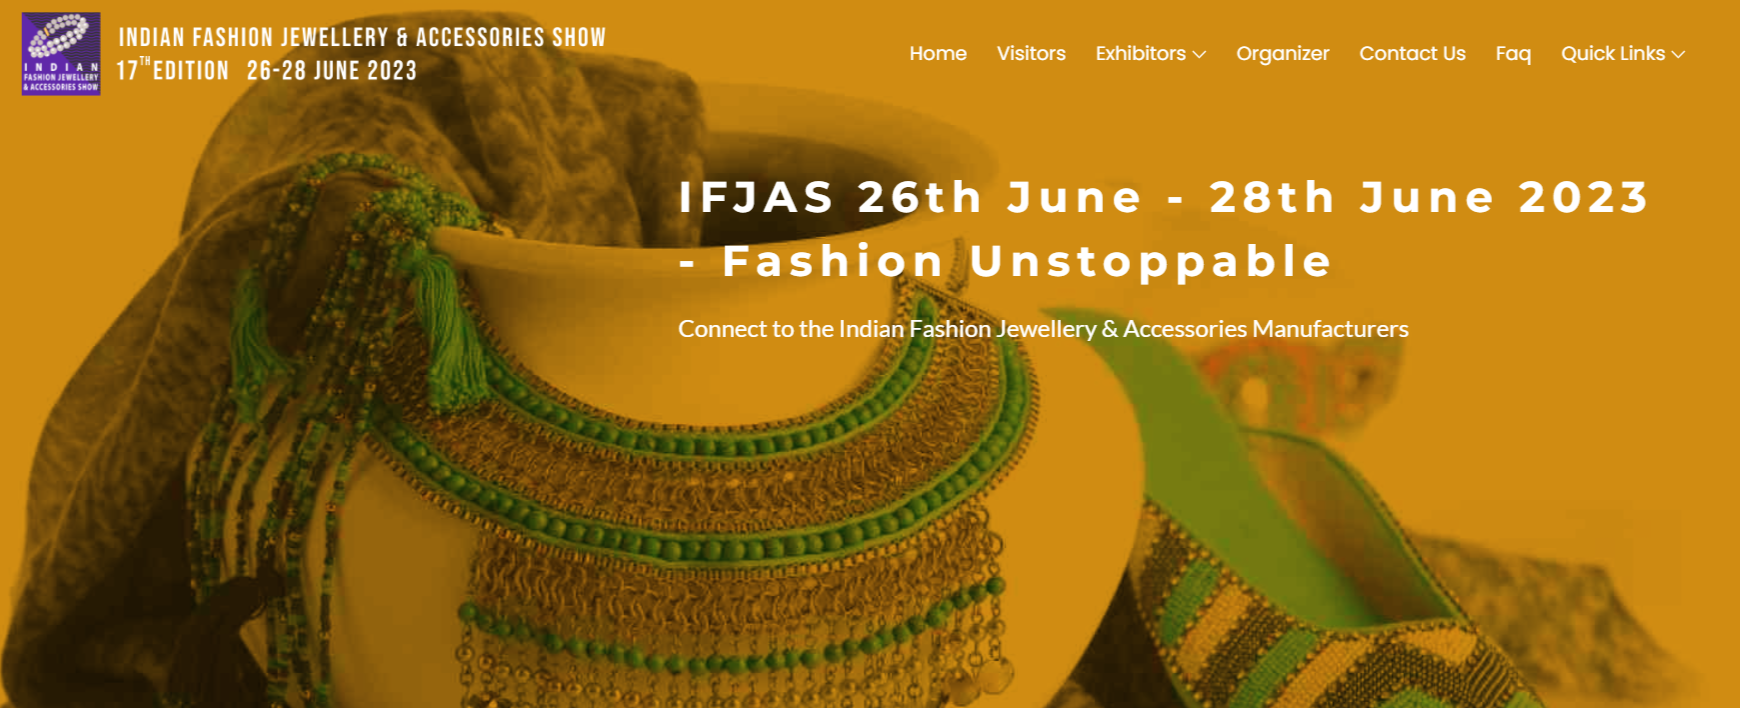 Indian Fashion Jewellery & Accessories Show (IFJAS) - Greater Noida, 2023